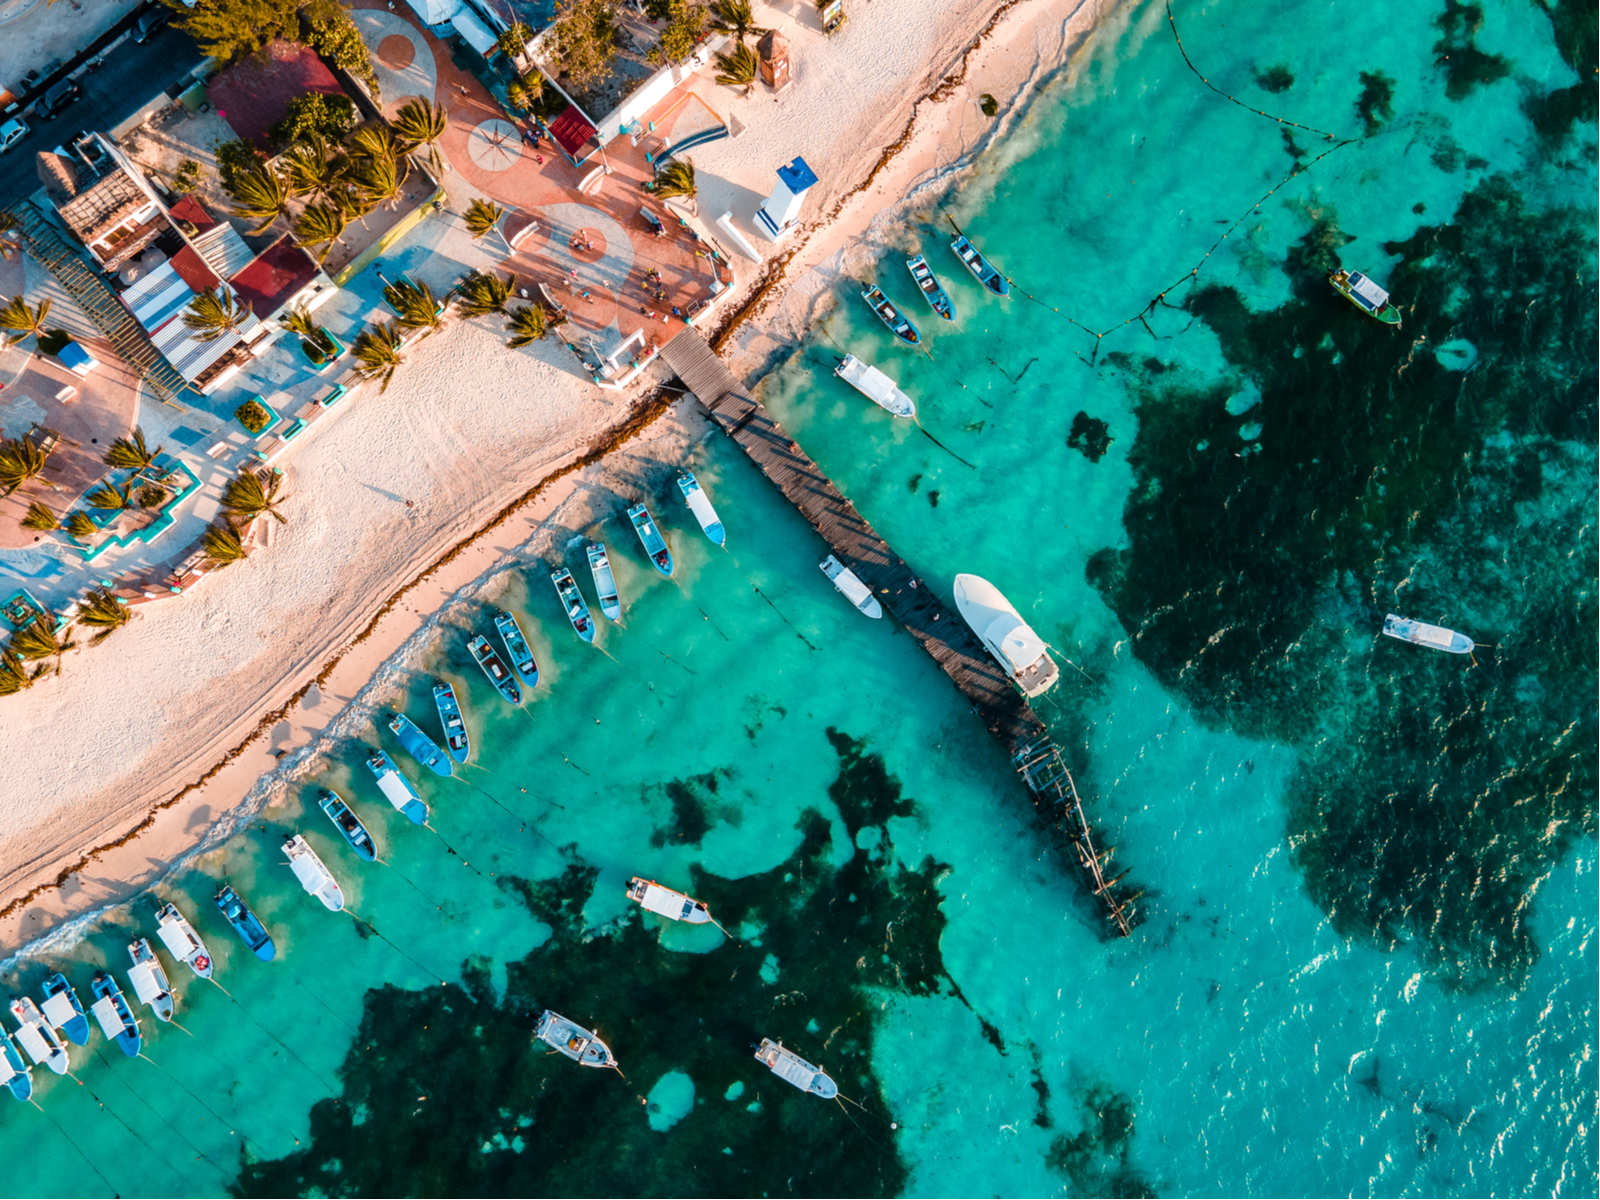 Overhead view on white sand Puerto Morelos Beach's, one of the best beaches in Cancun, anchored small boats on crystalline waters and a short boardwalk leading towards a resort